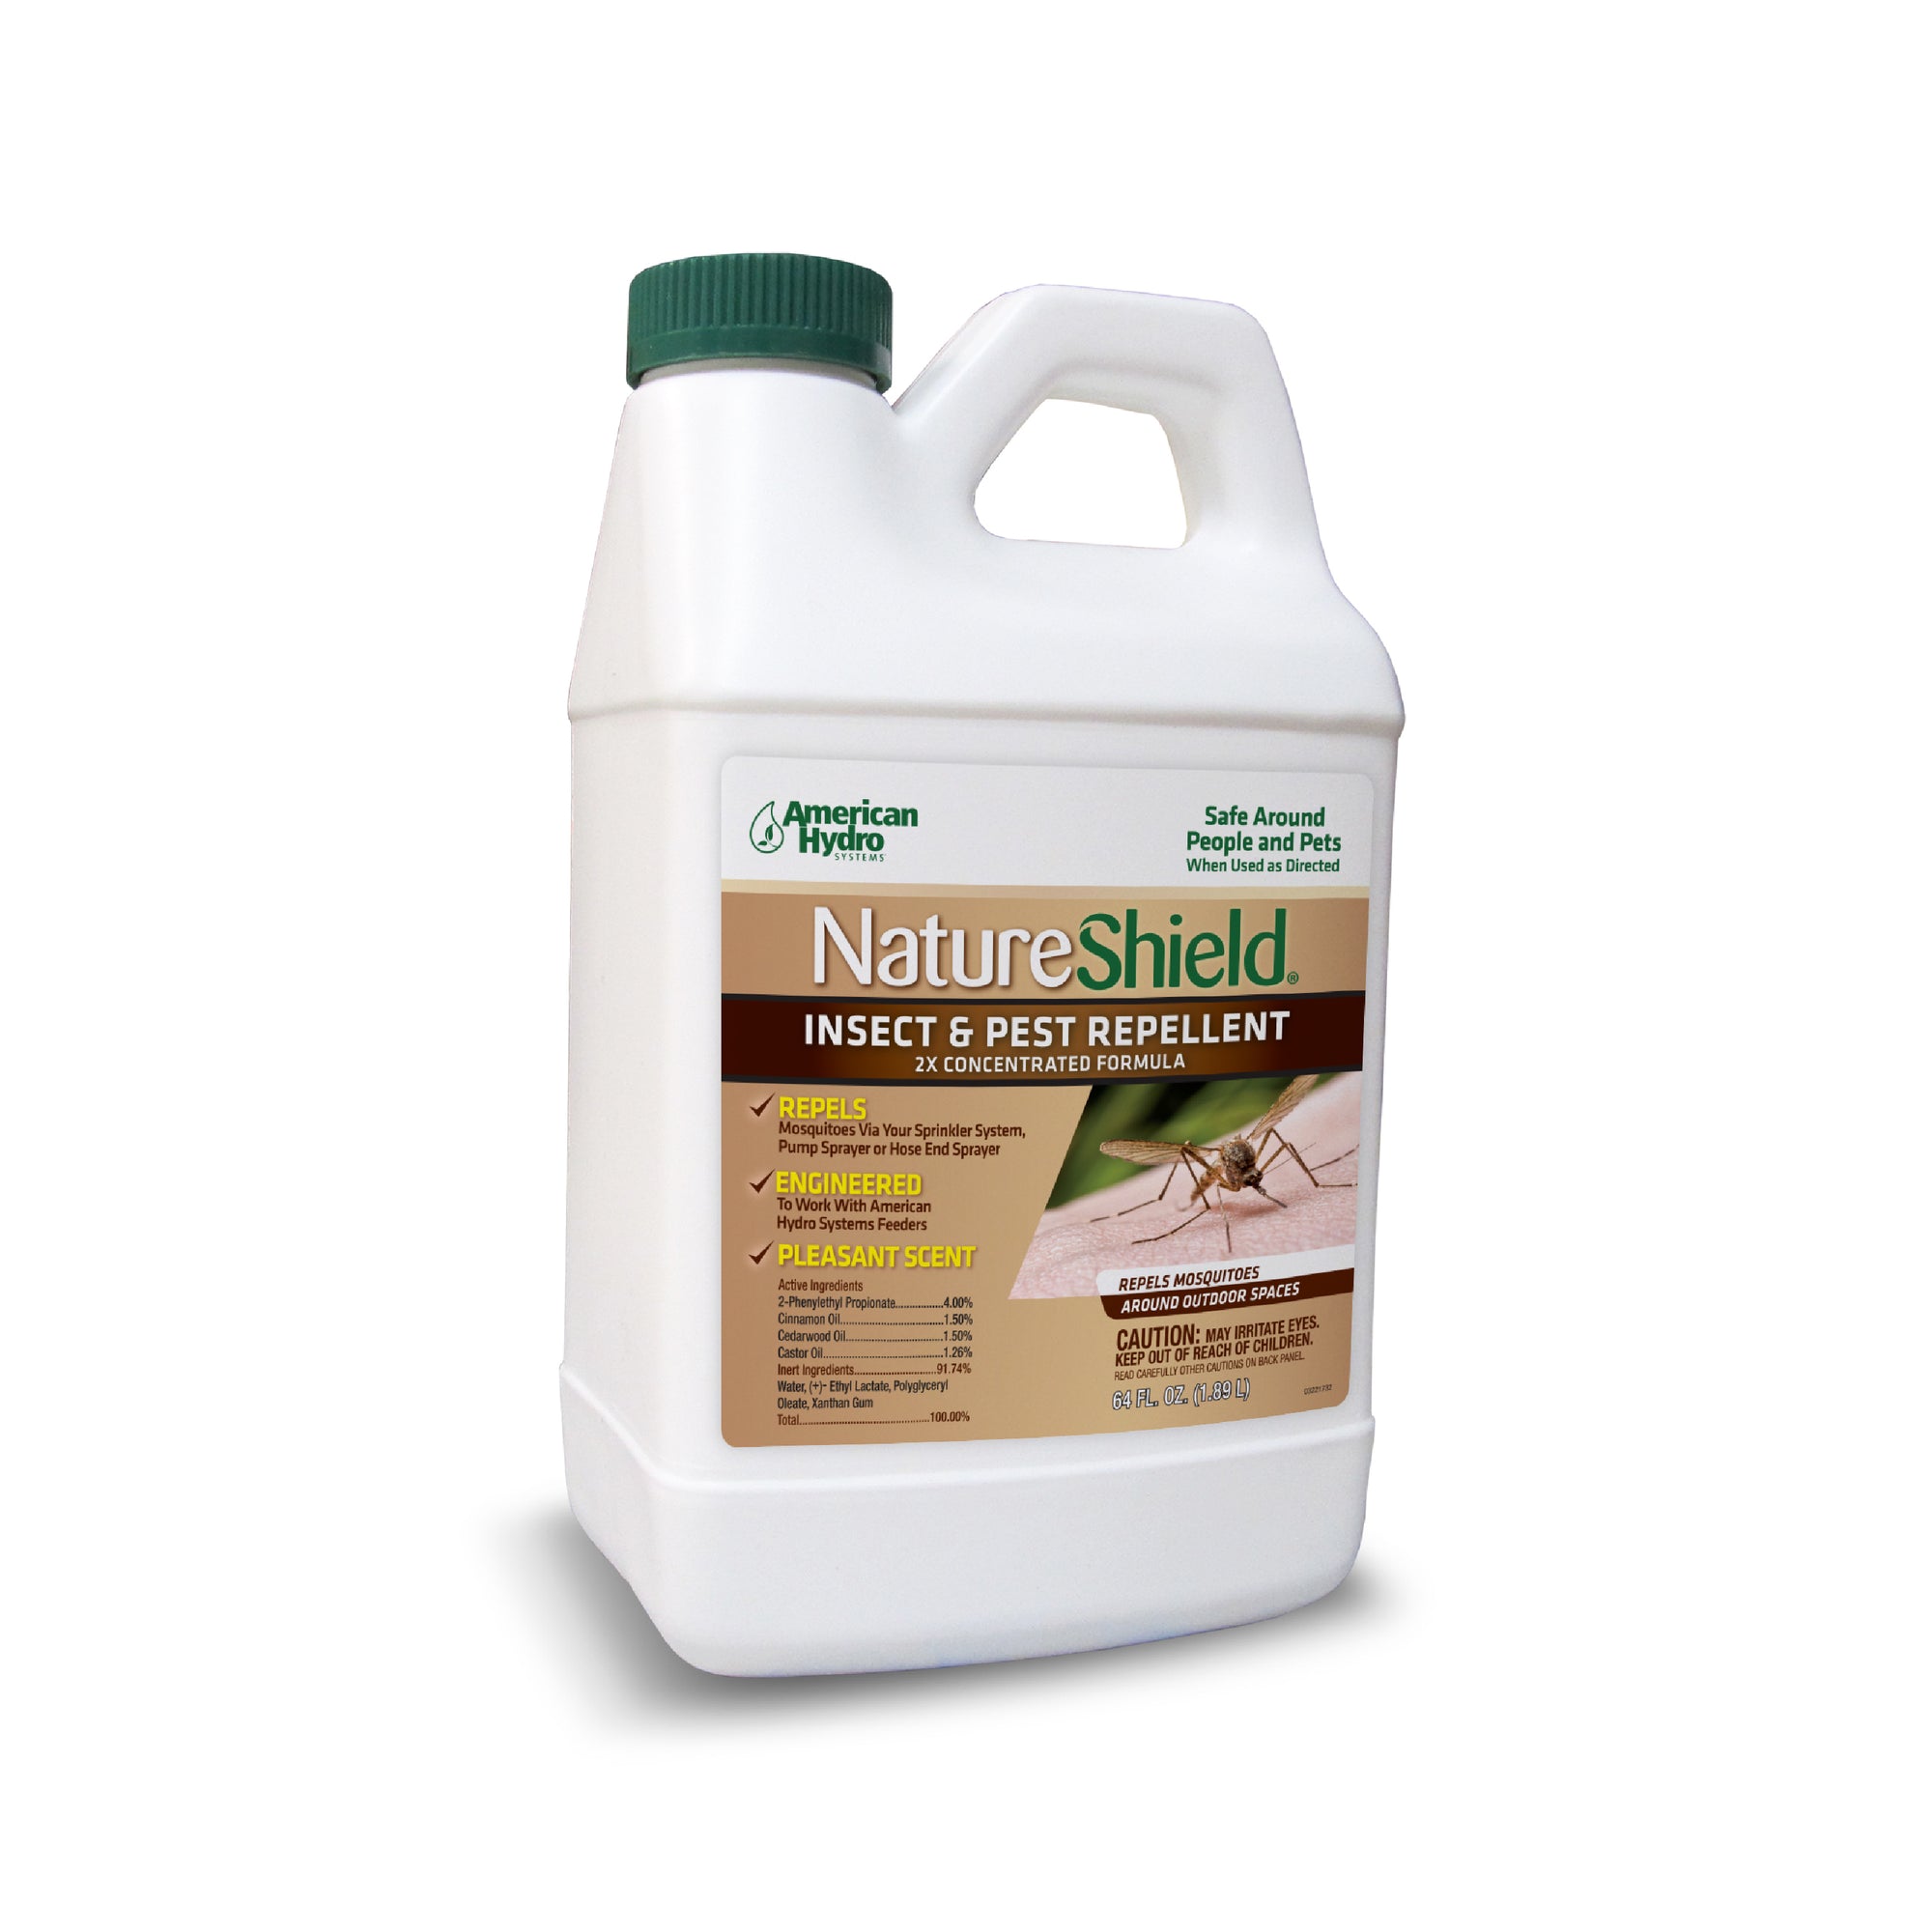 NatureShield® Insect & Pest Repellent